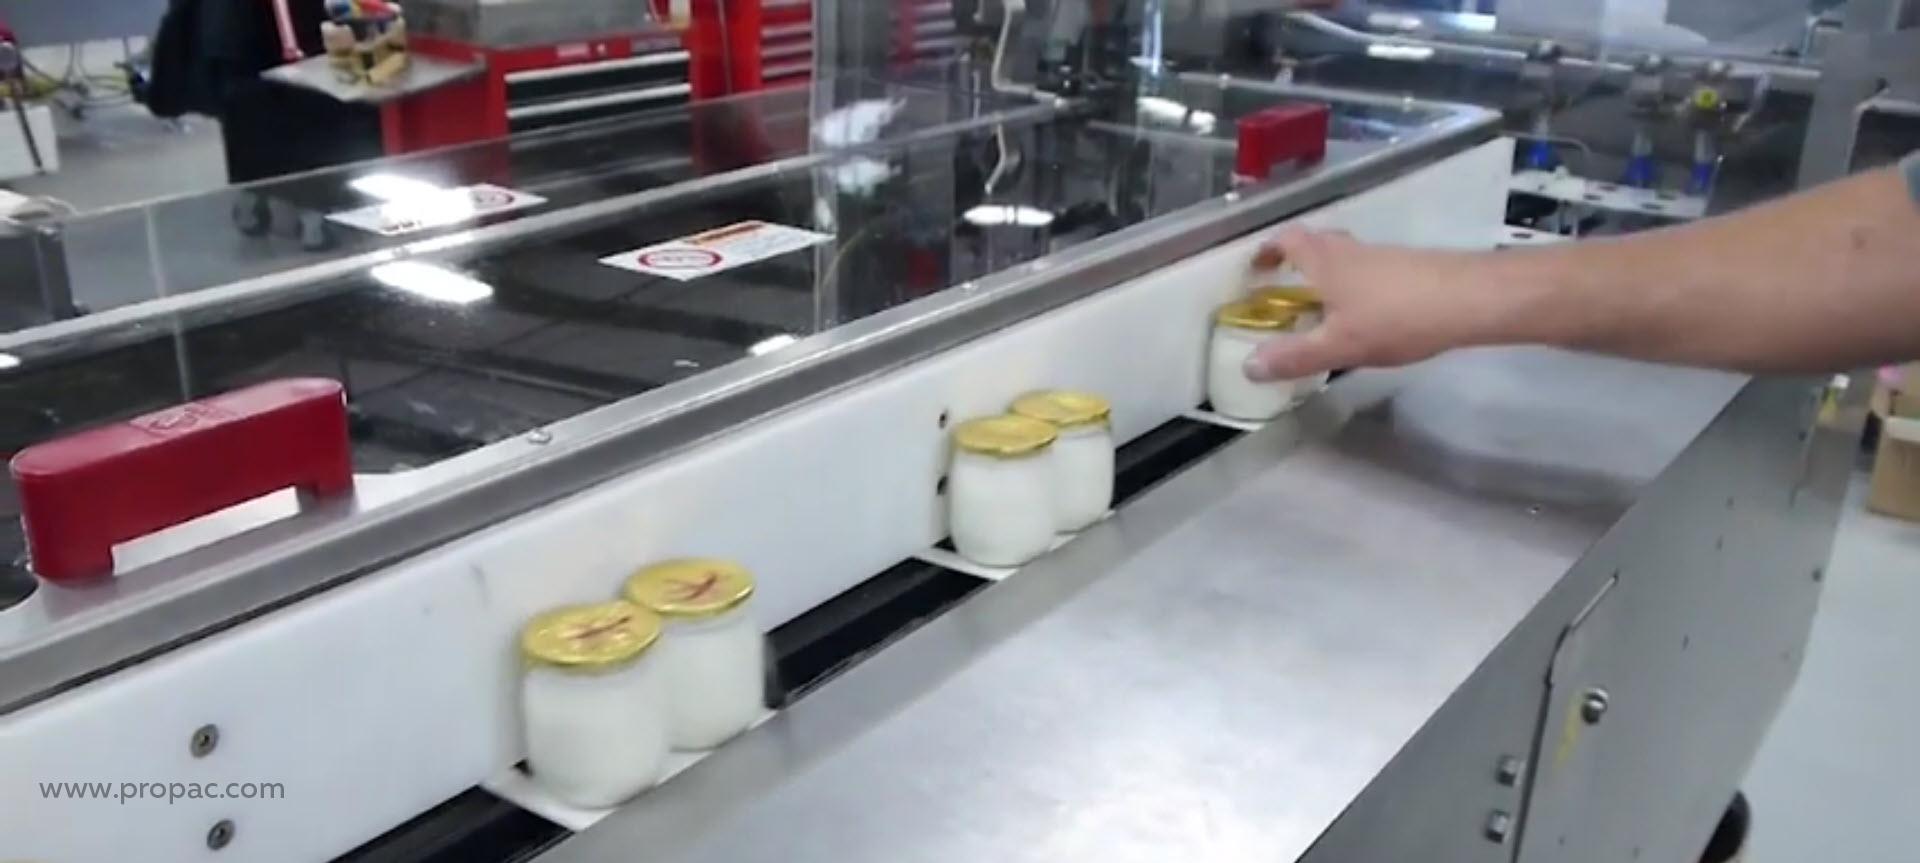 Manual placement of jars onto the paper packaging on a semi-automated cartoning machine.